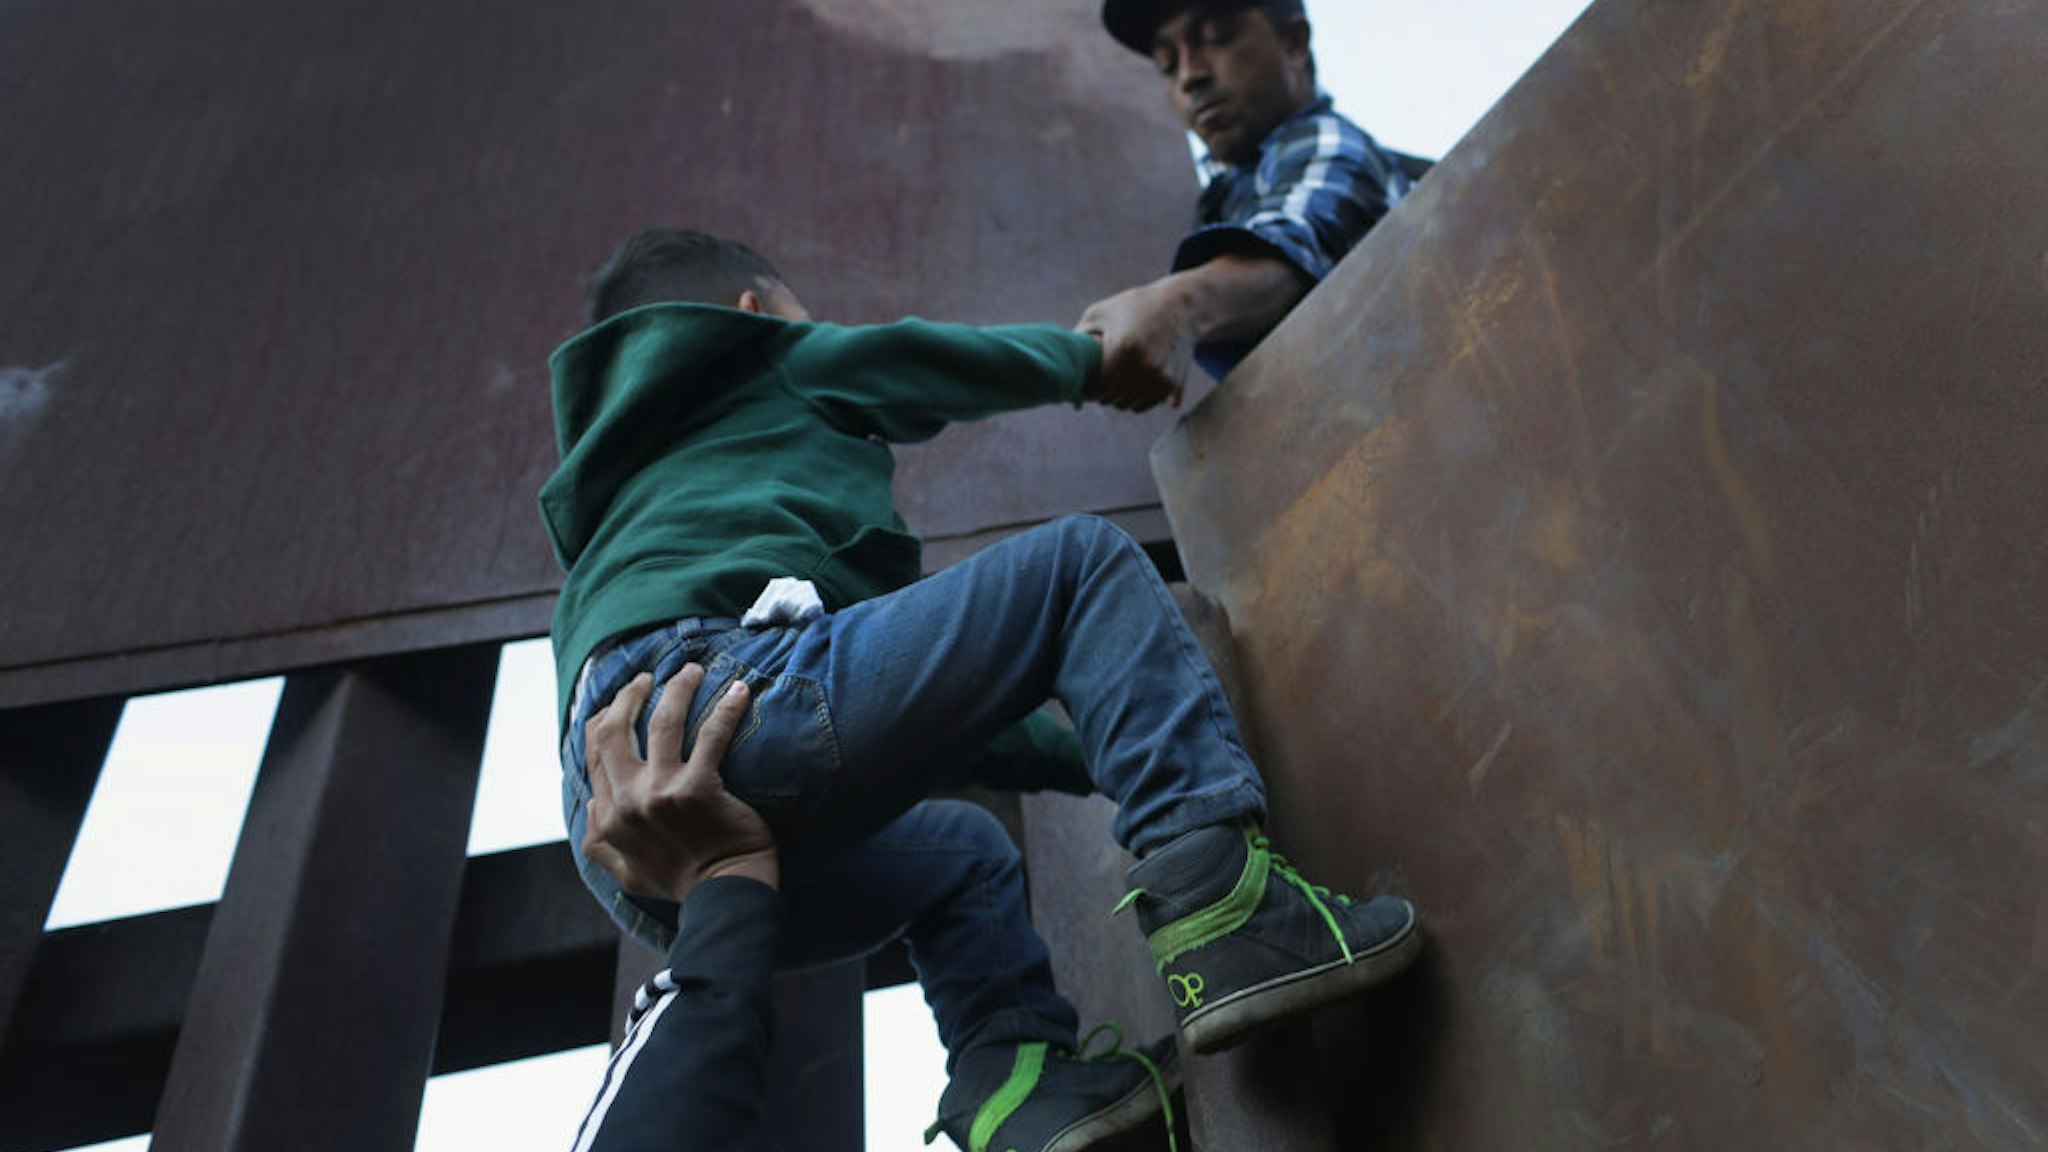 TIJUANA, MEXICO - DECEMBER 02: A boy is hoisted by fellow members of the migrant caravan over the U.S.-Mexico border fence on December 2, 2018 from Tijuana, Mexico. Numerous members of the caravan were able to cross over from Tijuana to San Diego and were quickly taken into custody by U.S. Border Patrol agents. Most had planned to request political asylum in the United States after traveling more than 6 weeks from Central America. (Photo by John Moore/Getty Images)